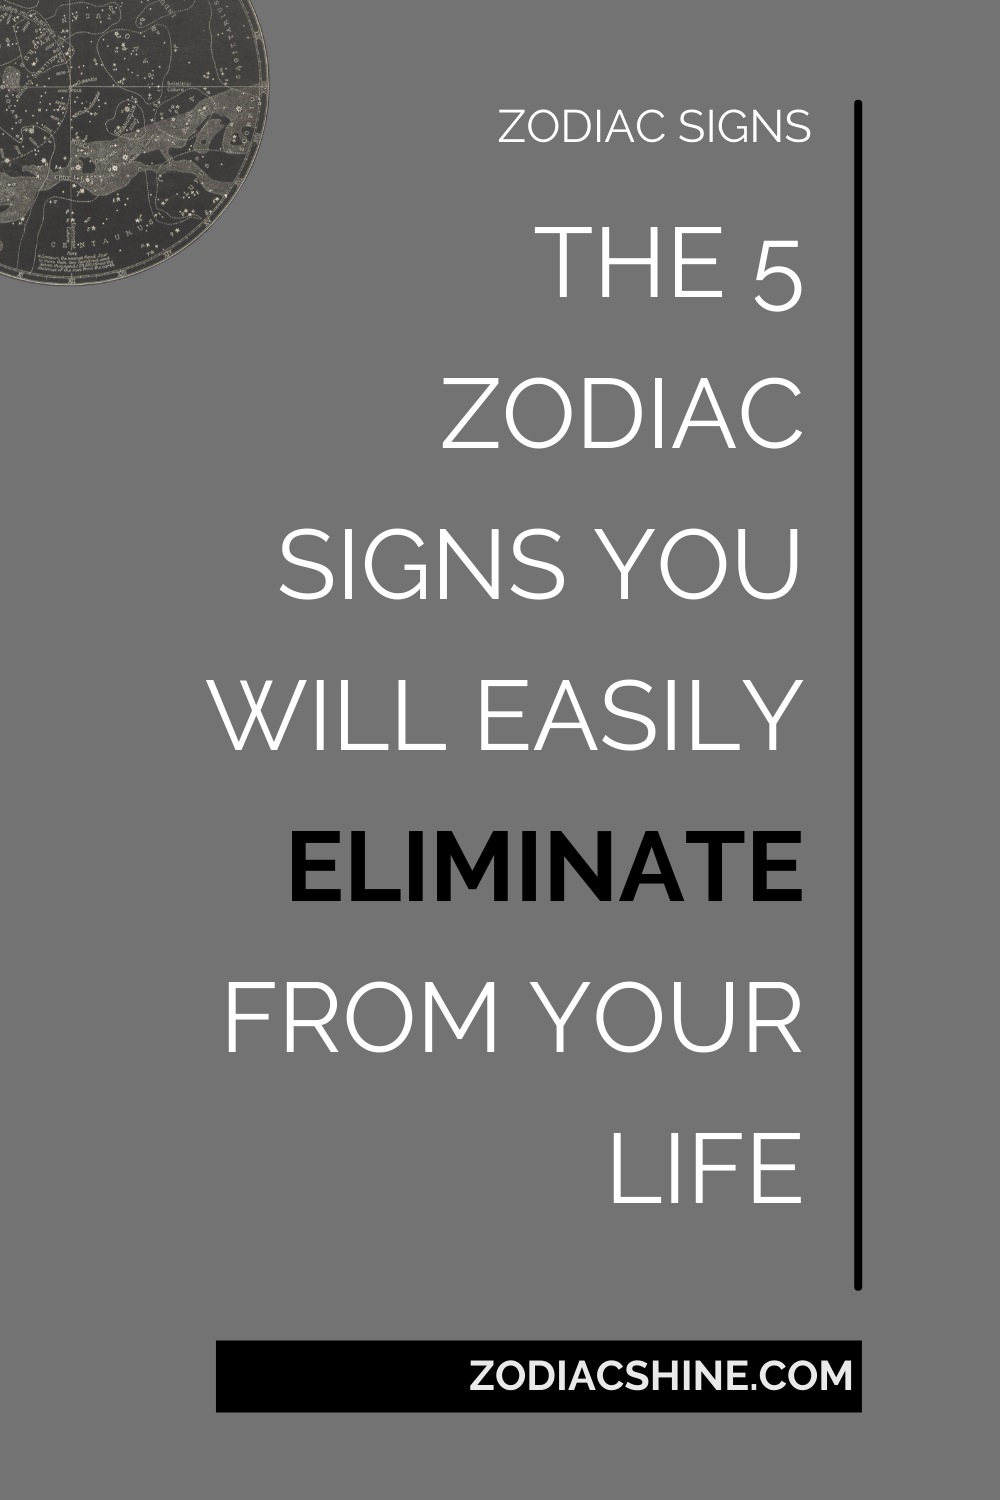 The 5 Zodiac Signs You Will Easily Eliminate From Your Life